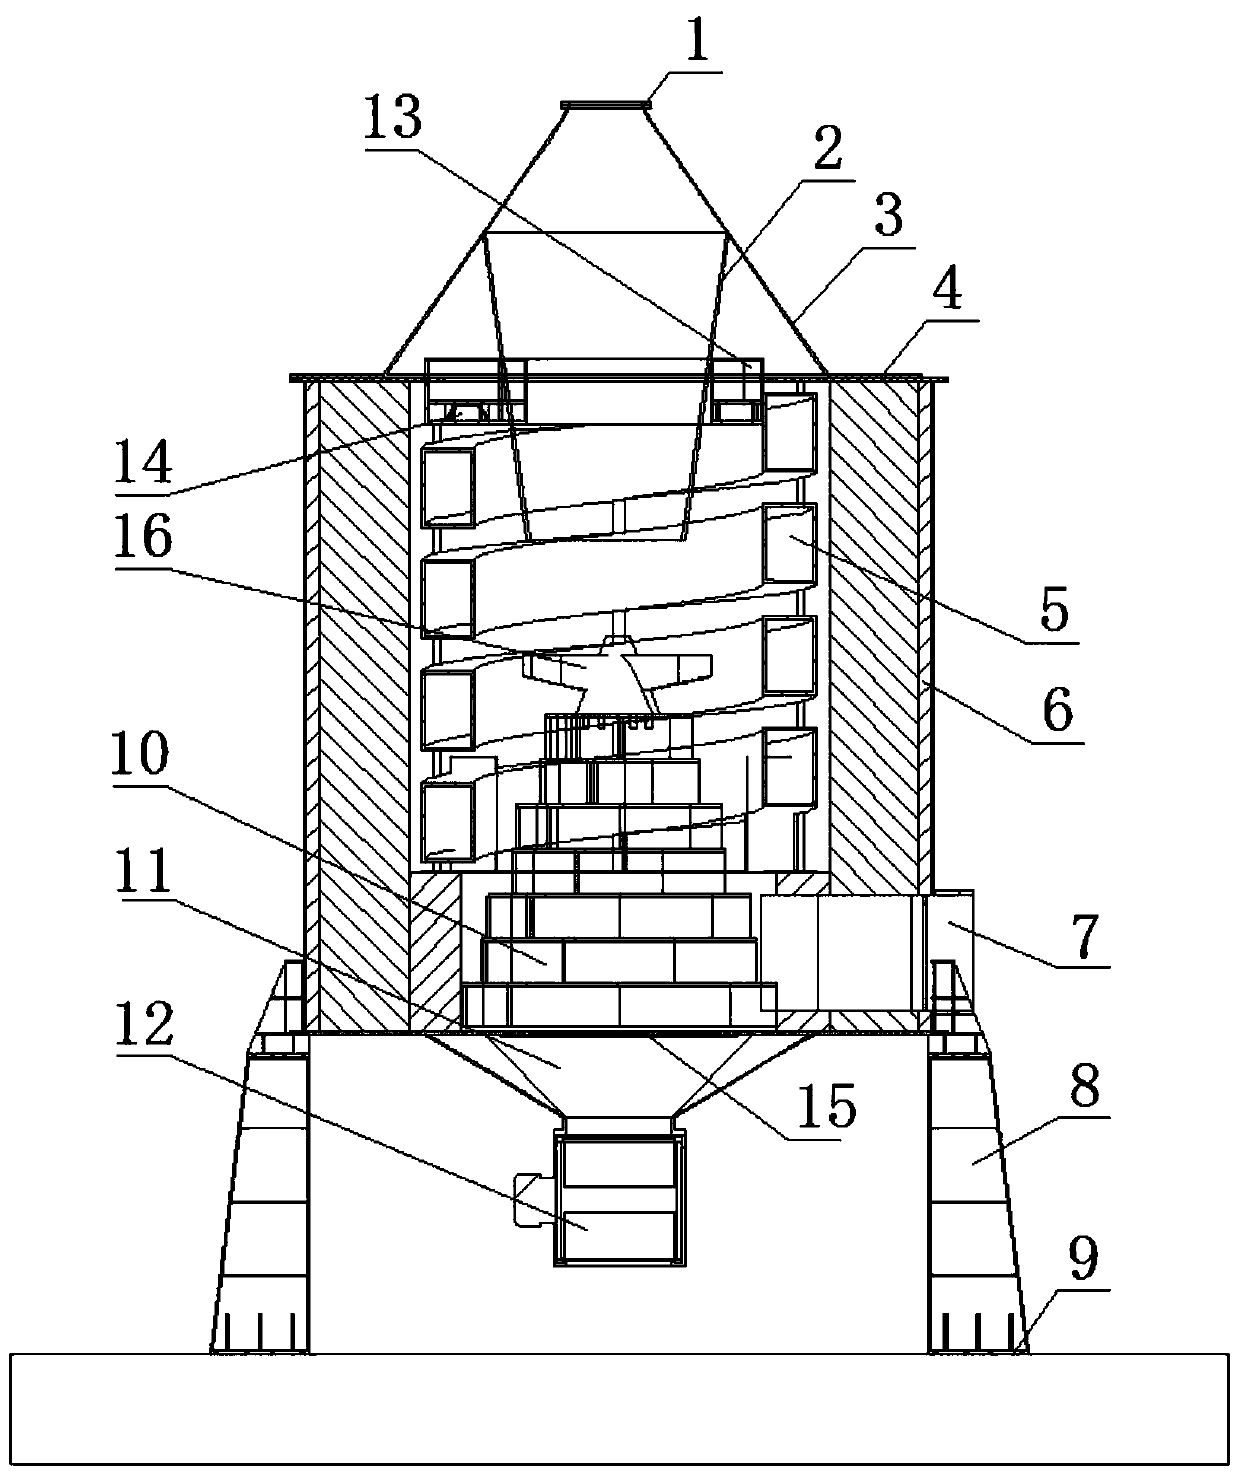 Secondary combustion chamber for household garbage flue gas